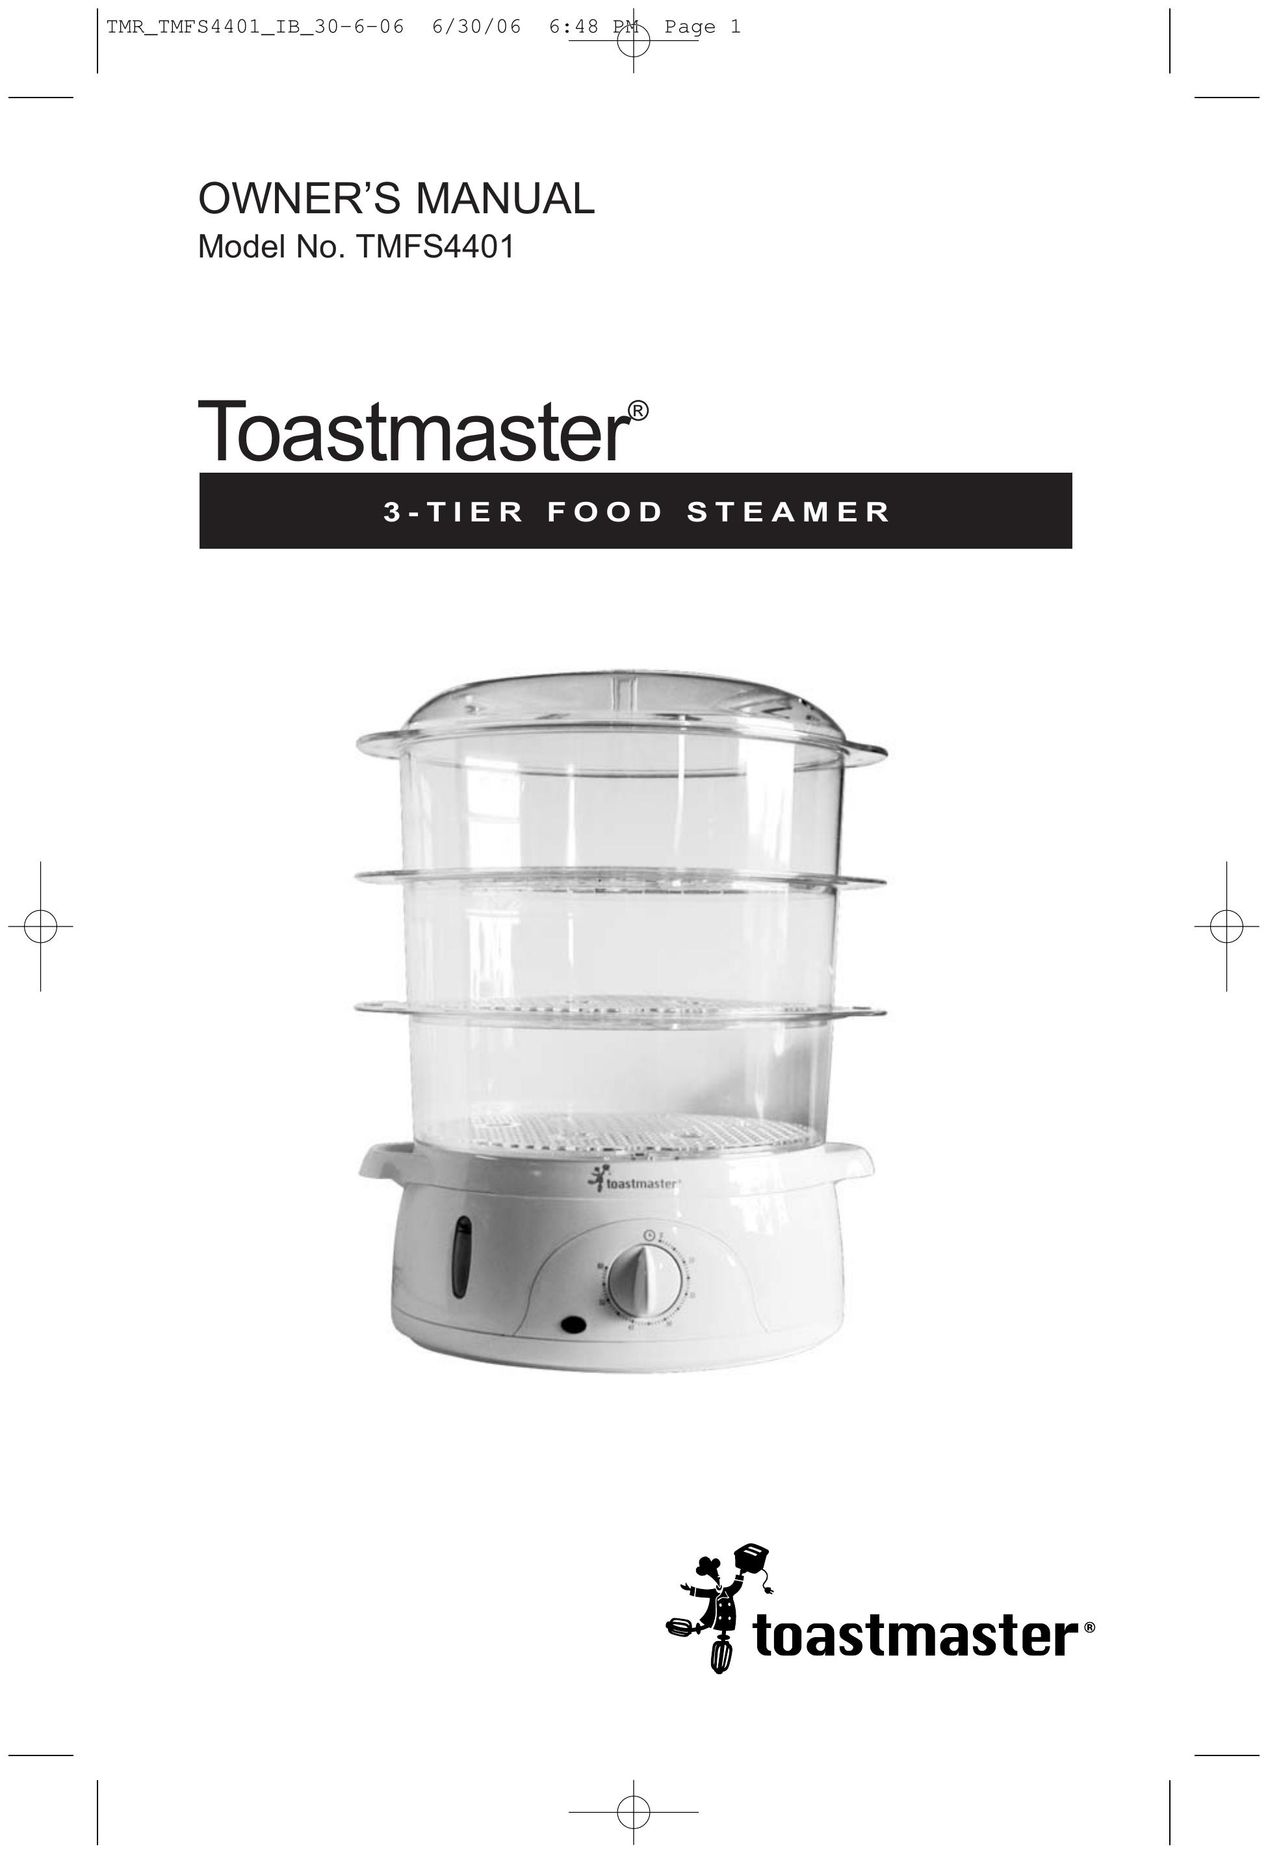 Toastmaster TMFS4401 Electric Steamer User Manual